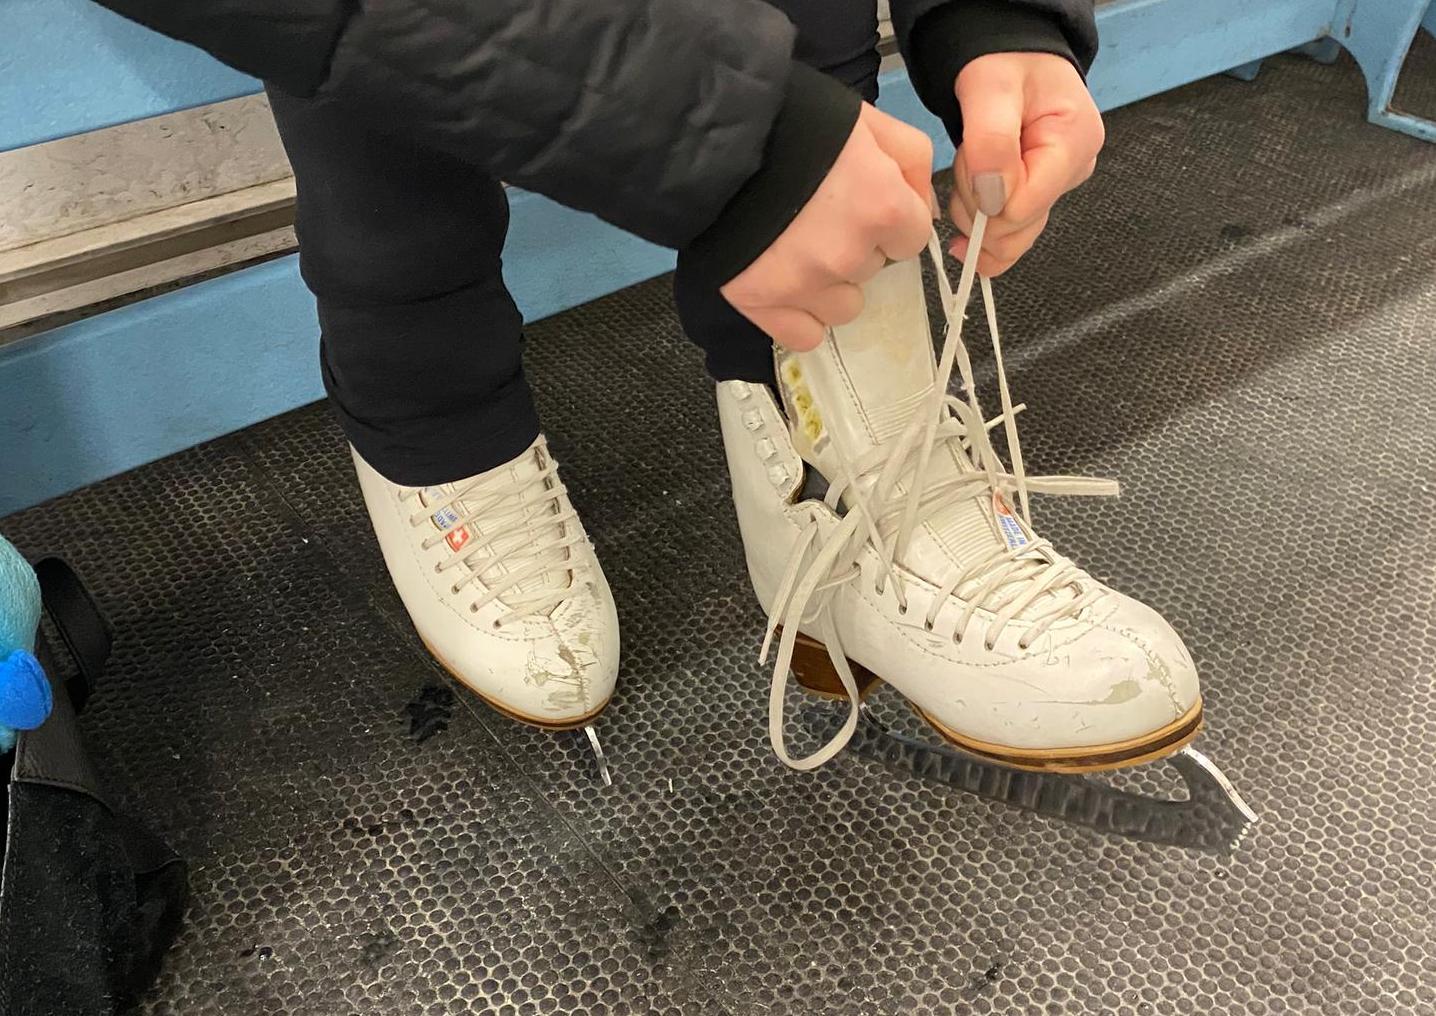 Six-week skating lessons are available at Planet Ice